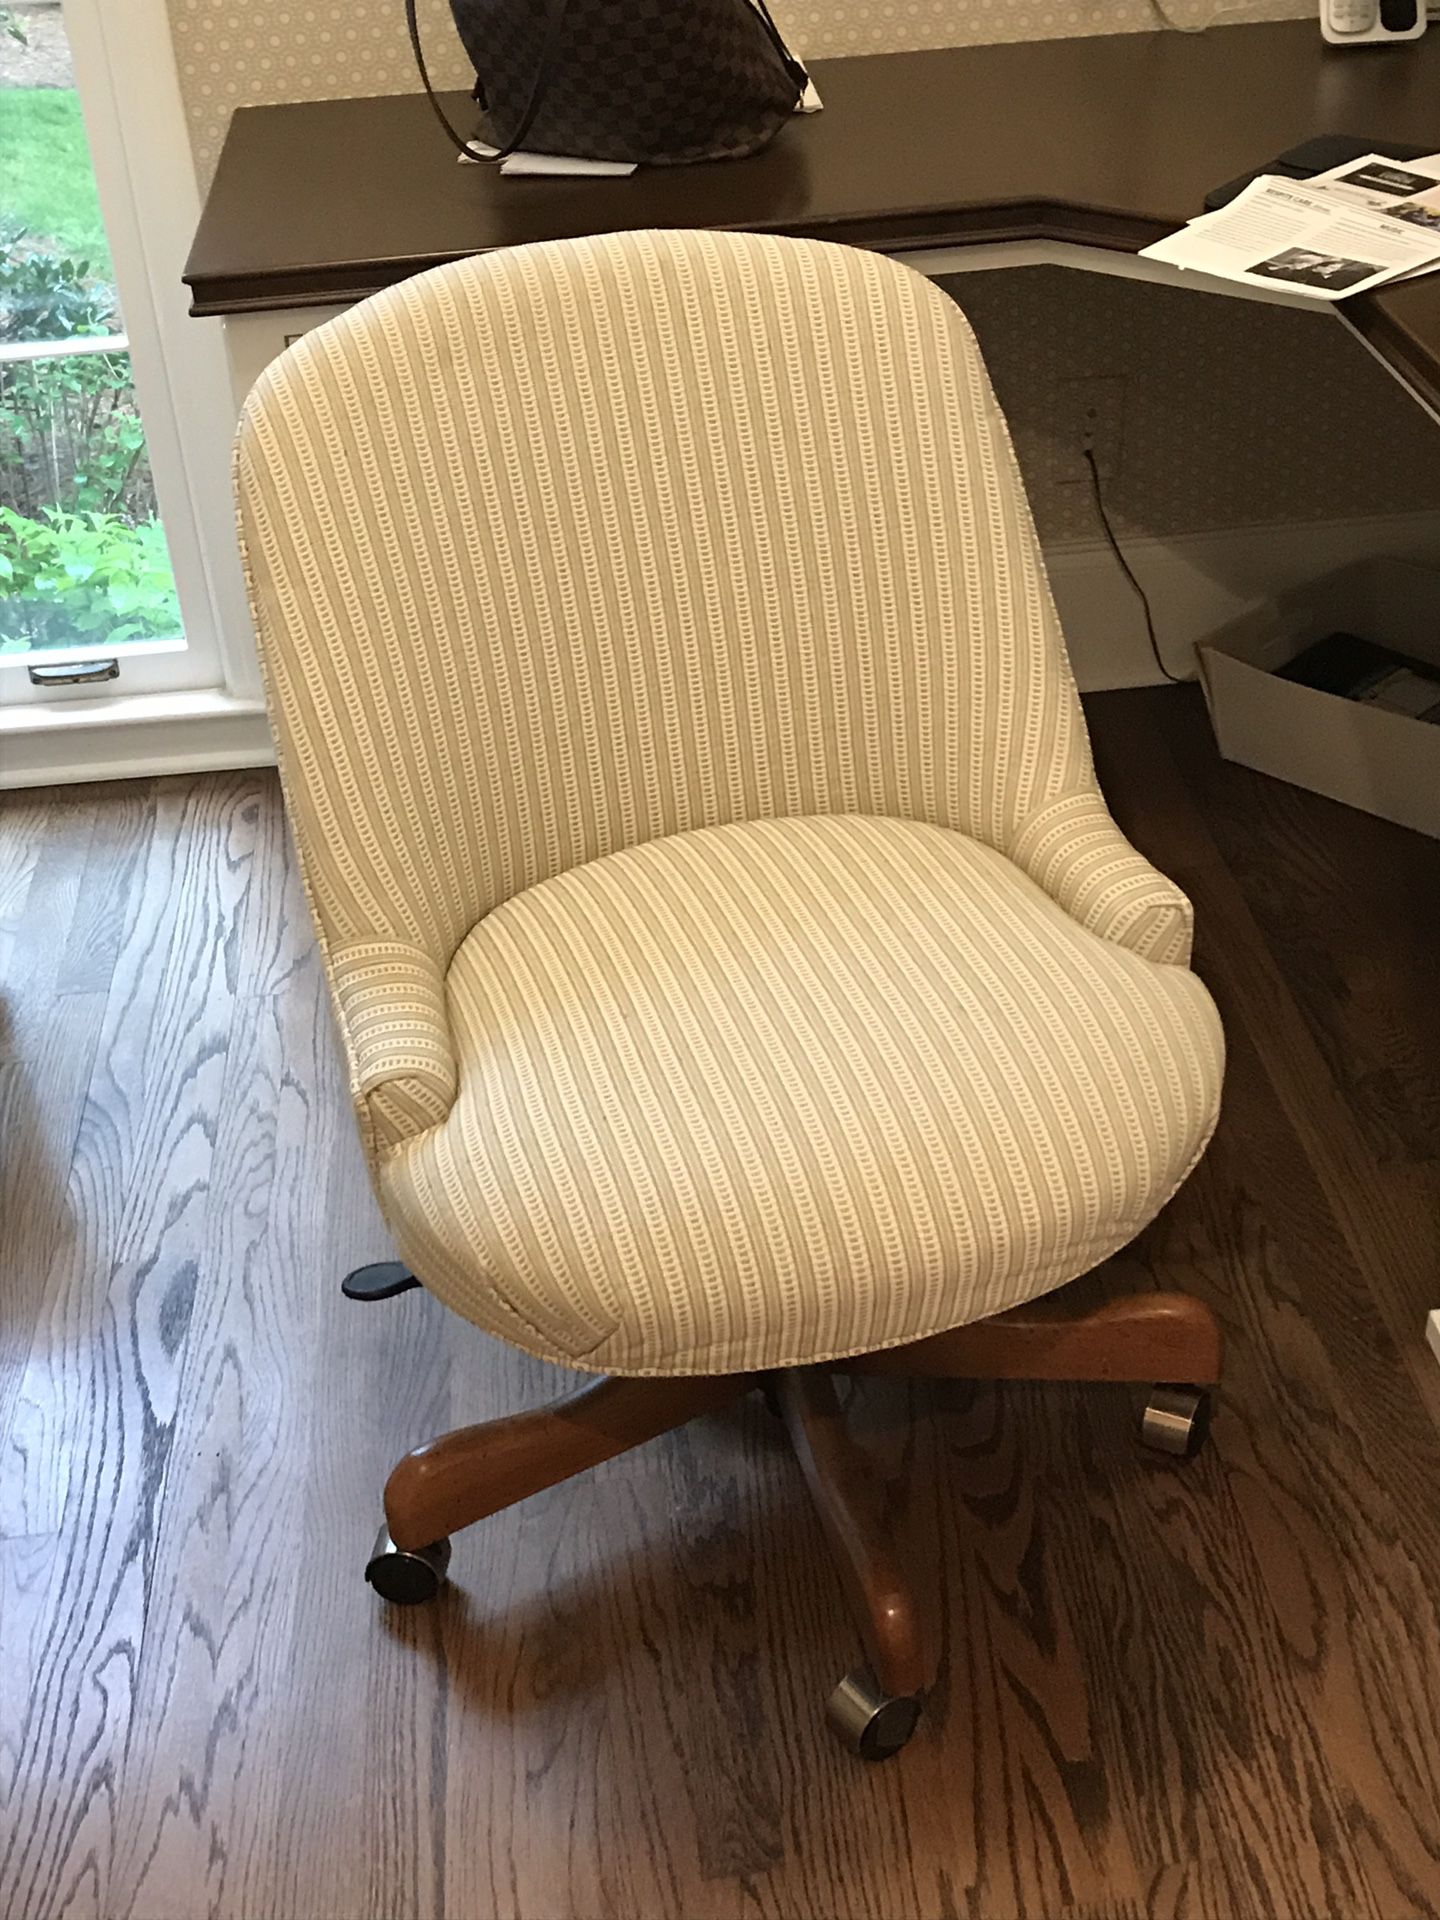 Upholstered desk chair on wood base with wheels